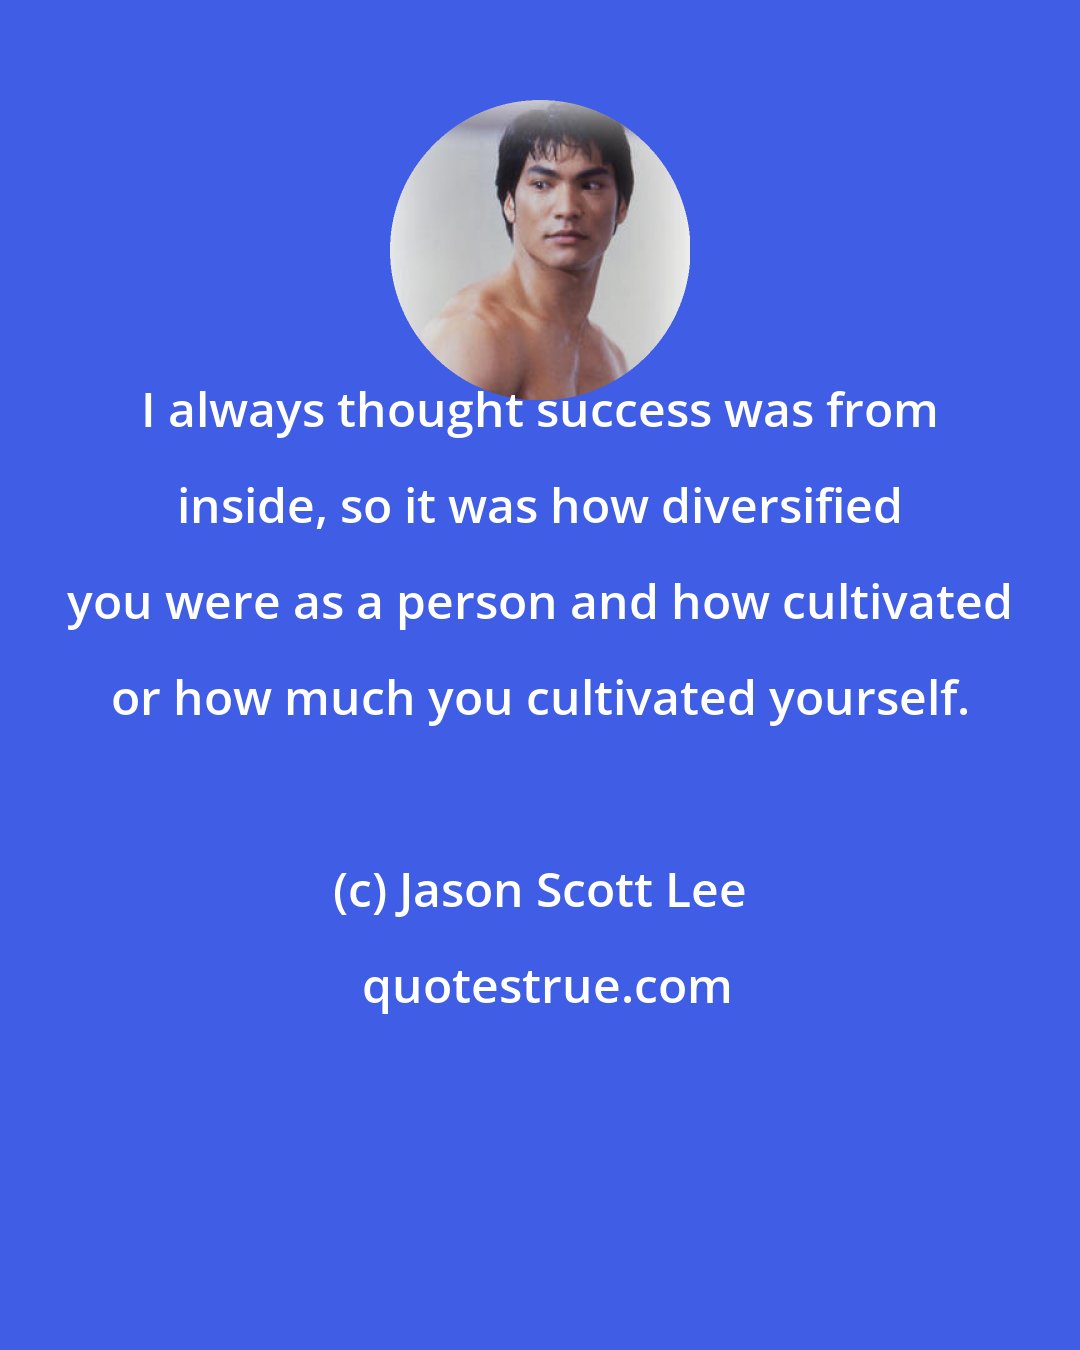 Jason Scott Lee: I always thought success was from inside, so it was how diversified you were as a person and how cultivated or how much you cultivated yourself.